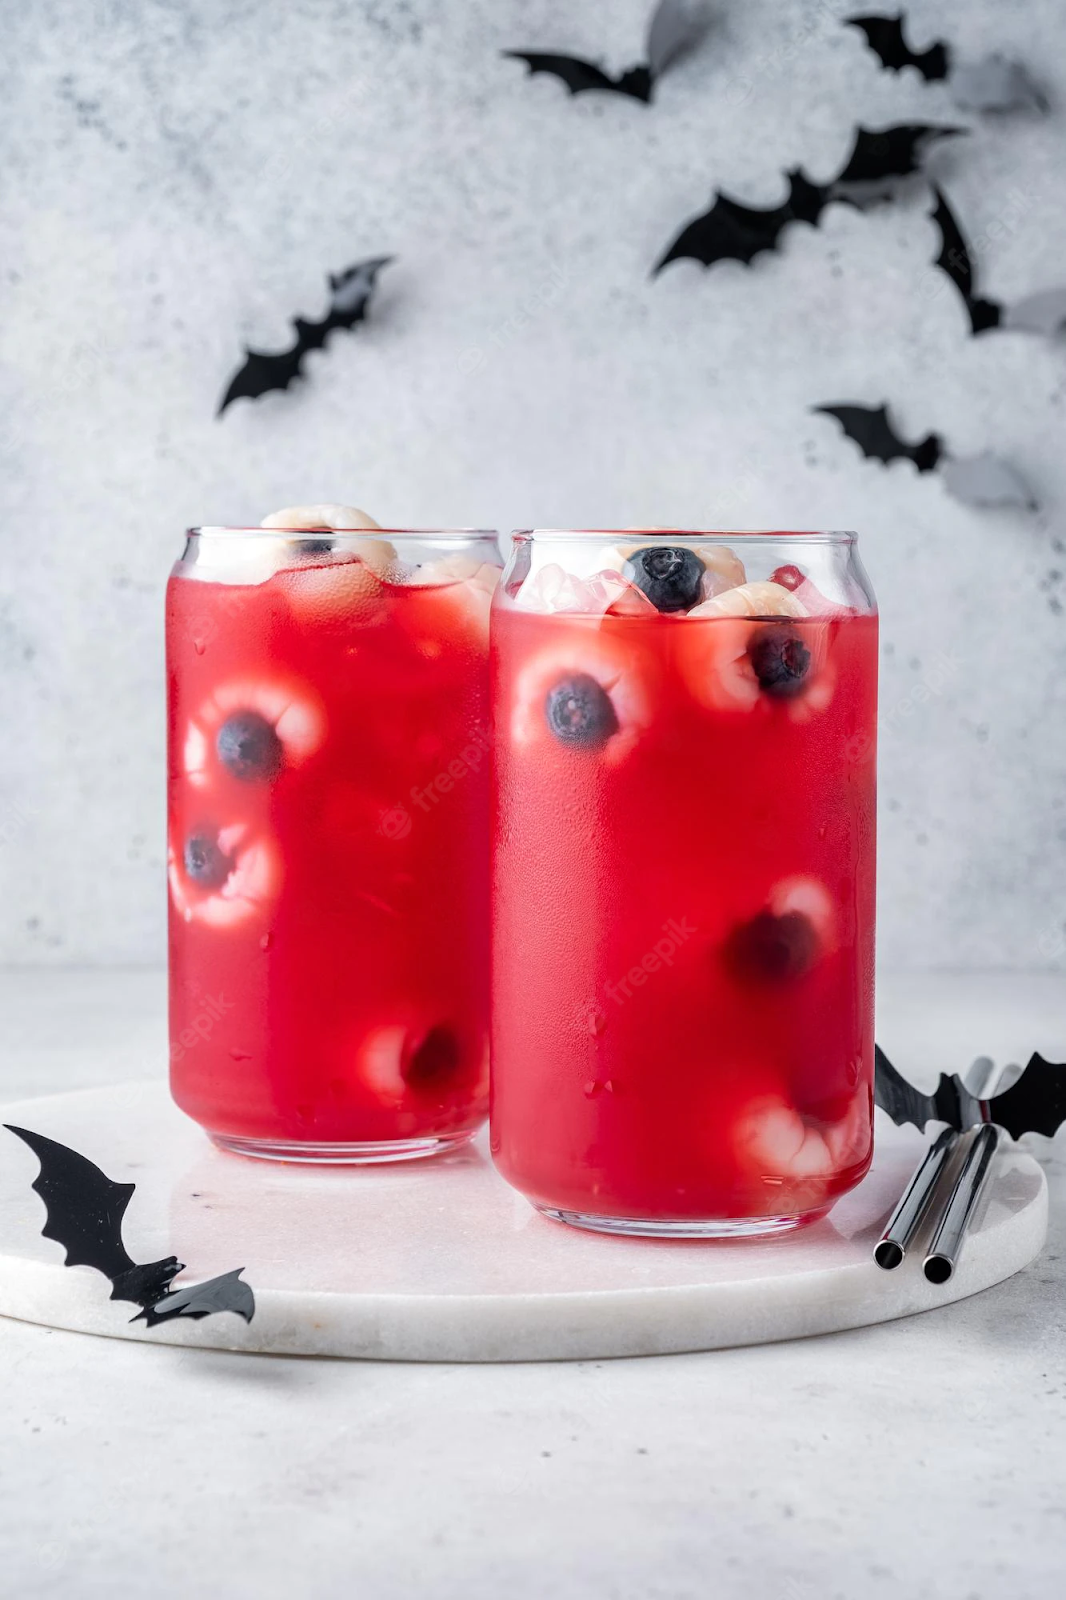 How to throw a kids Halloween party - spooky, fun and fang-tastic.